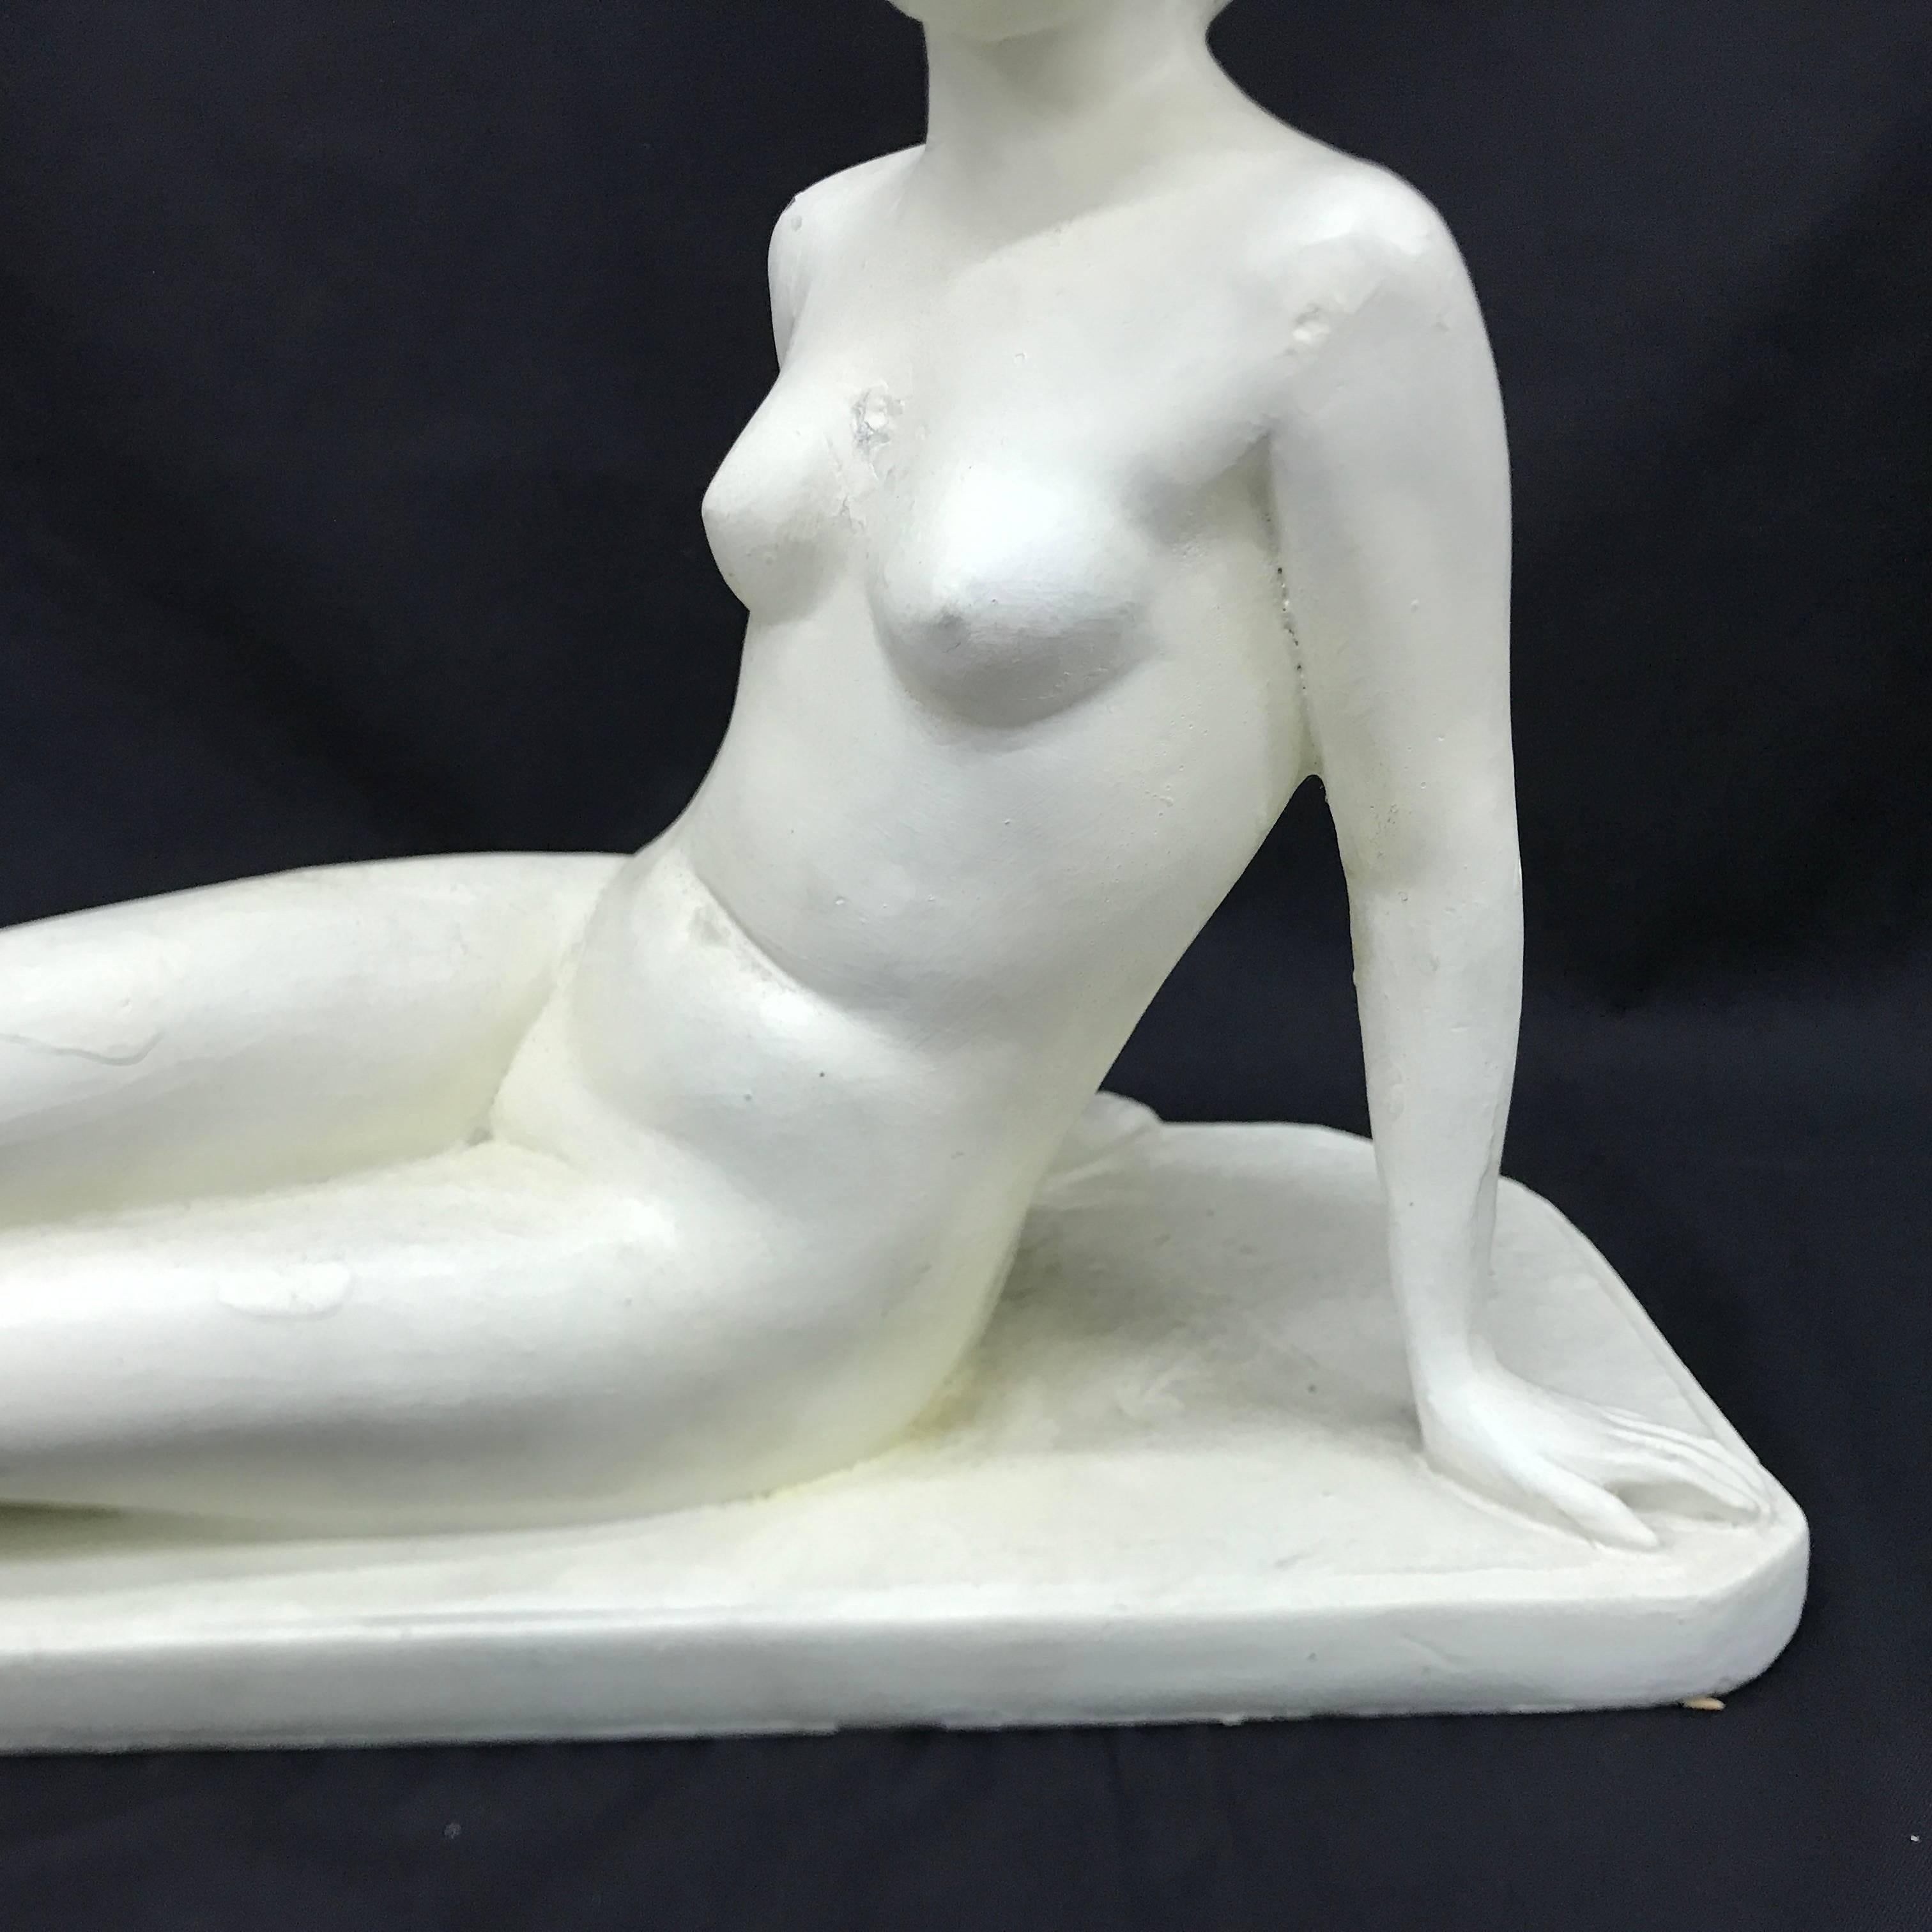 Nice woman body sculpture in ceramic made in Italy in 1930, signed S. Quaranta. Some small chips visible in the pics.